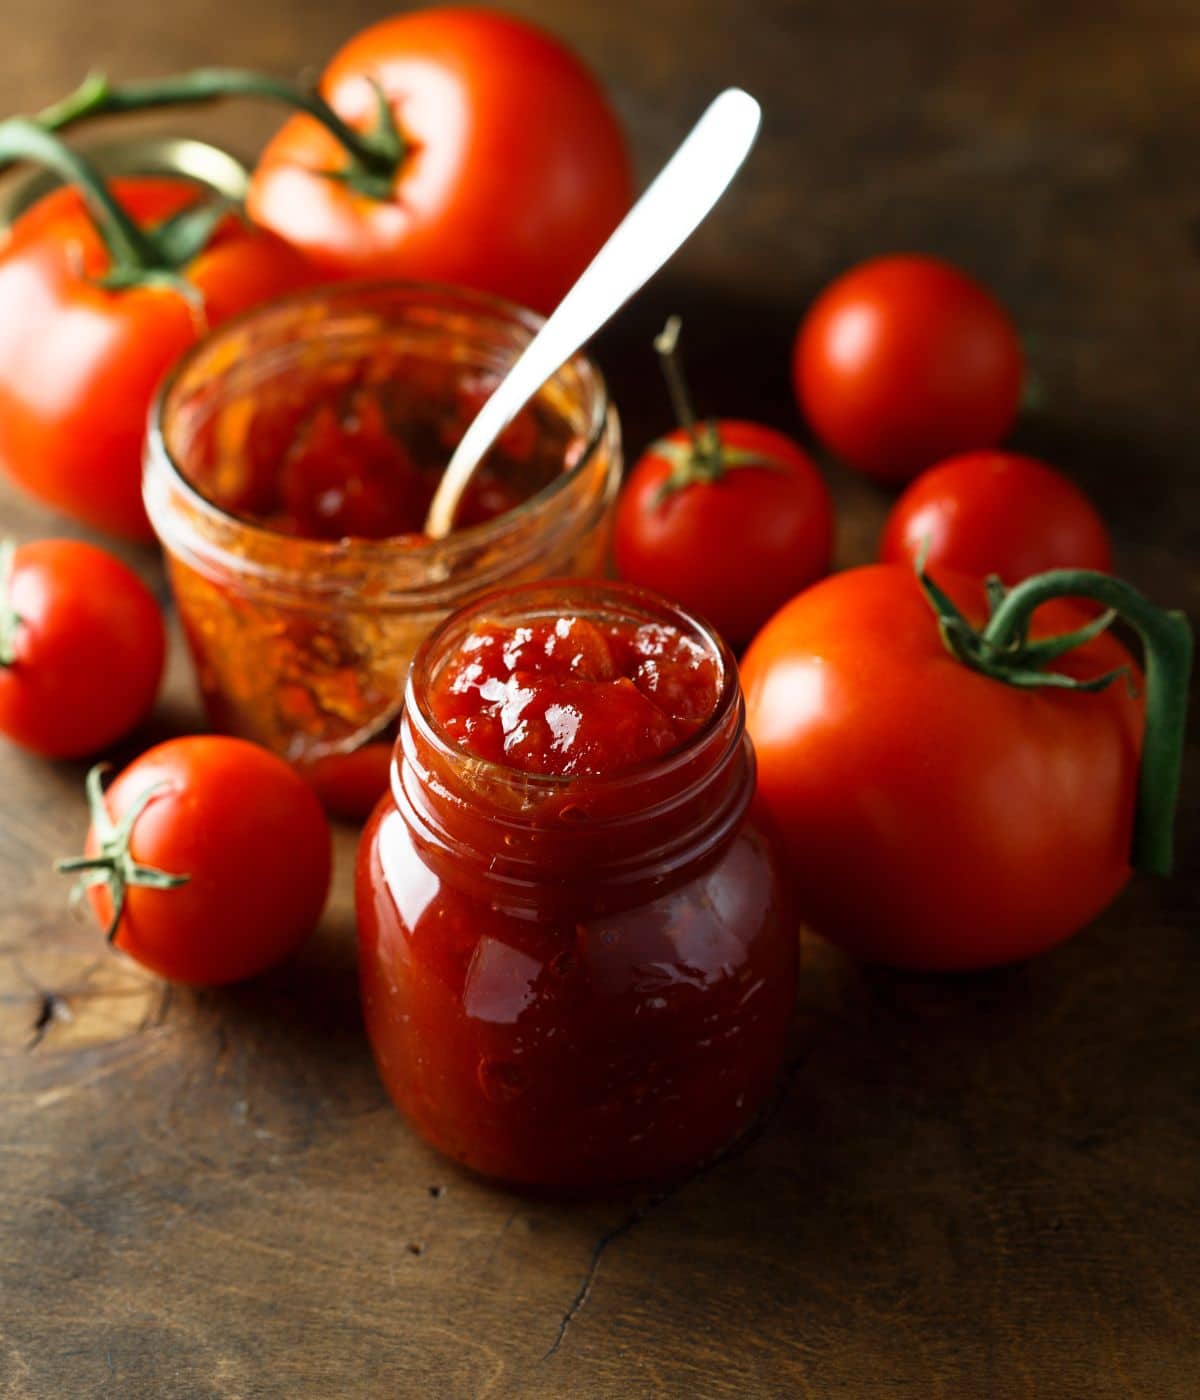 A jar is filled with tomato jam.